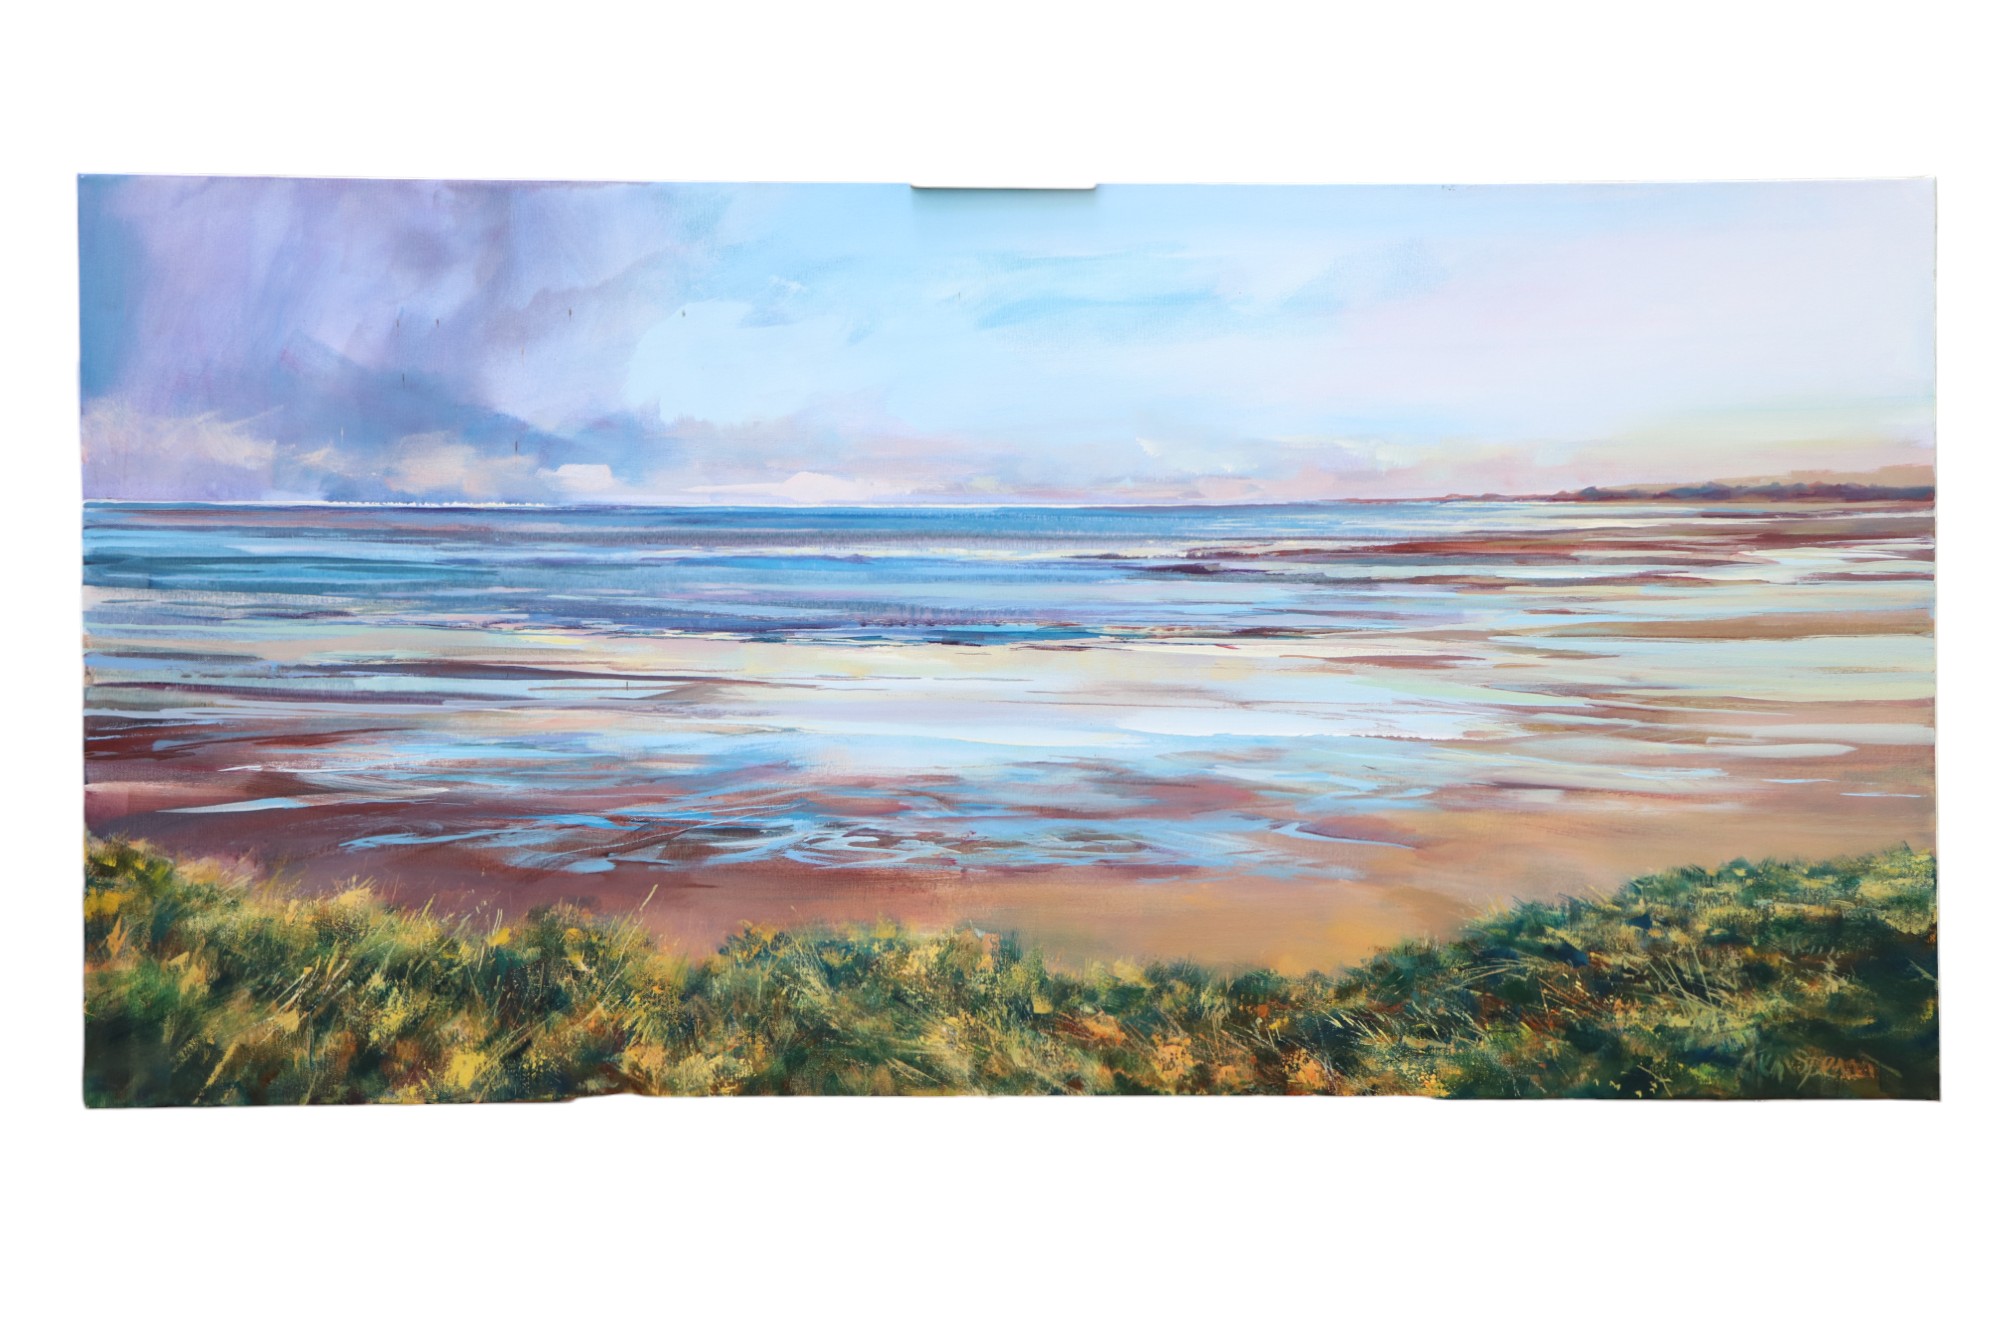 Ken Spencer (Northumbria, Contemporary) "Low Tide, Alnmouth", an expansive, panoramic, pastel-